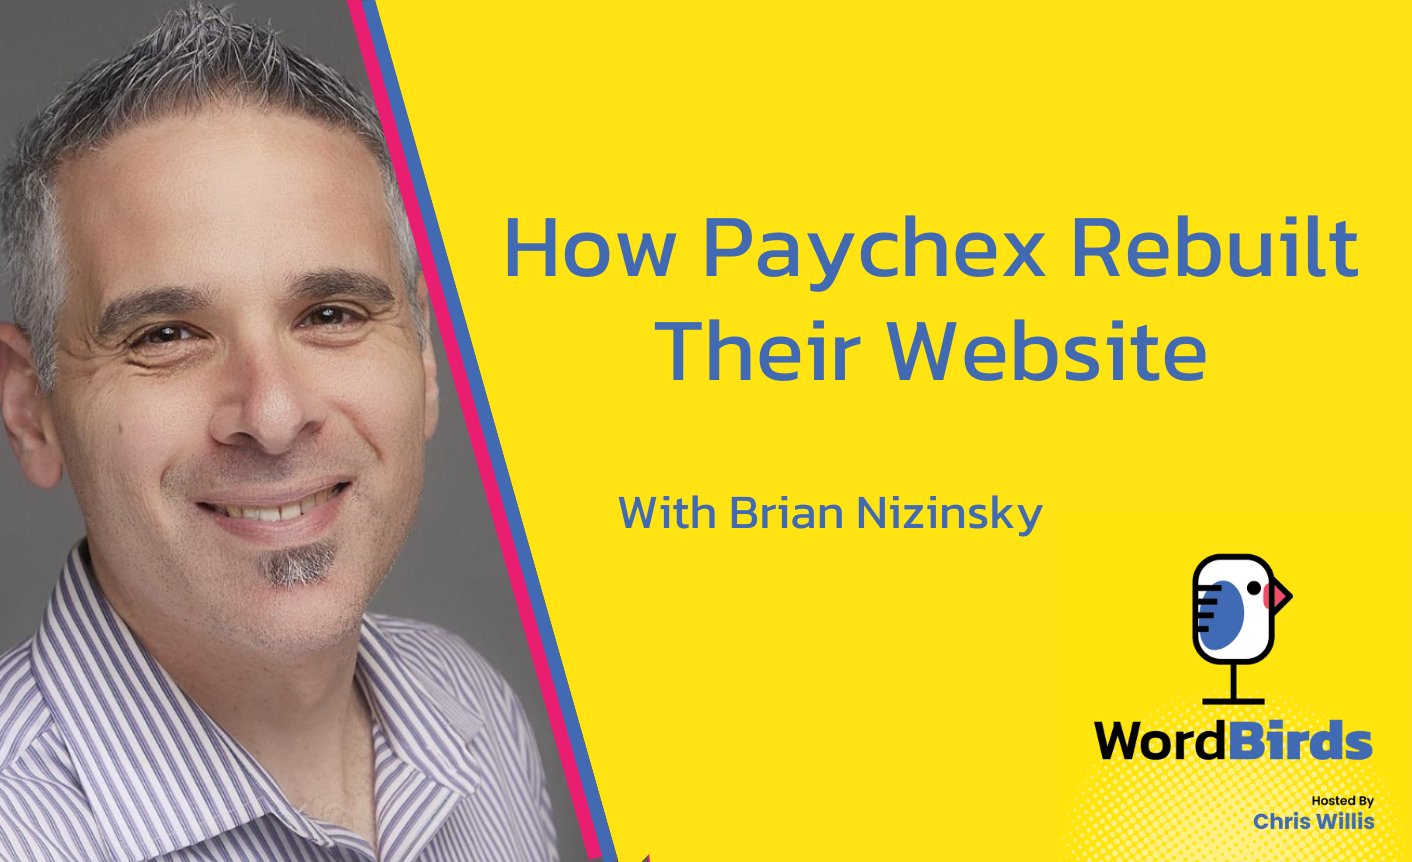 With a headshot of Brian Nizinsky on the left, the right side of the image has the title "How Paychex Rebuilt Their Website" on a yellow background.